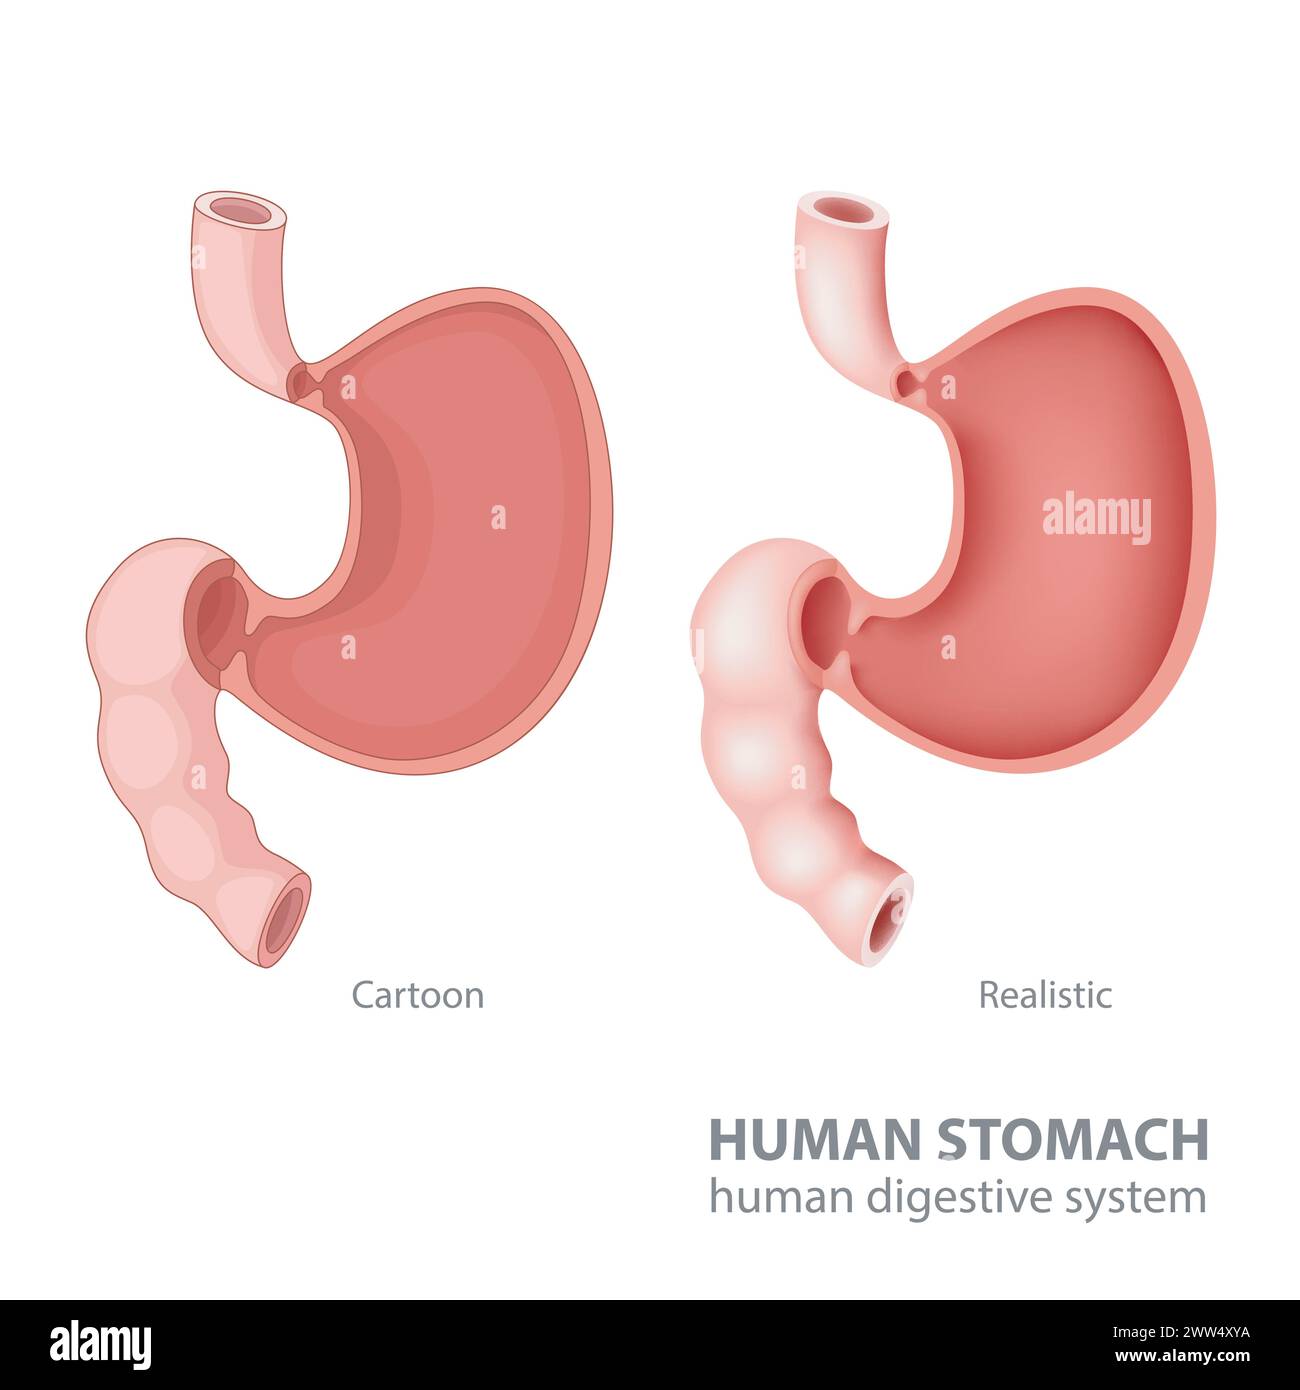 Human Stomach In Cartoon and Realistic, Vector Illustration Stock Vector